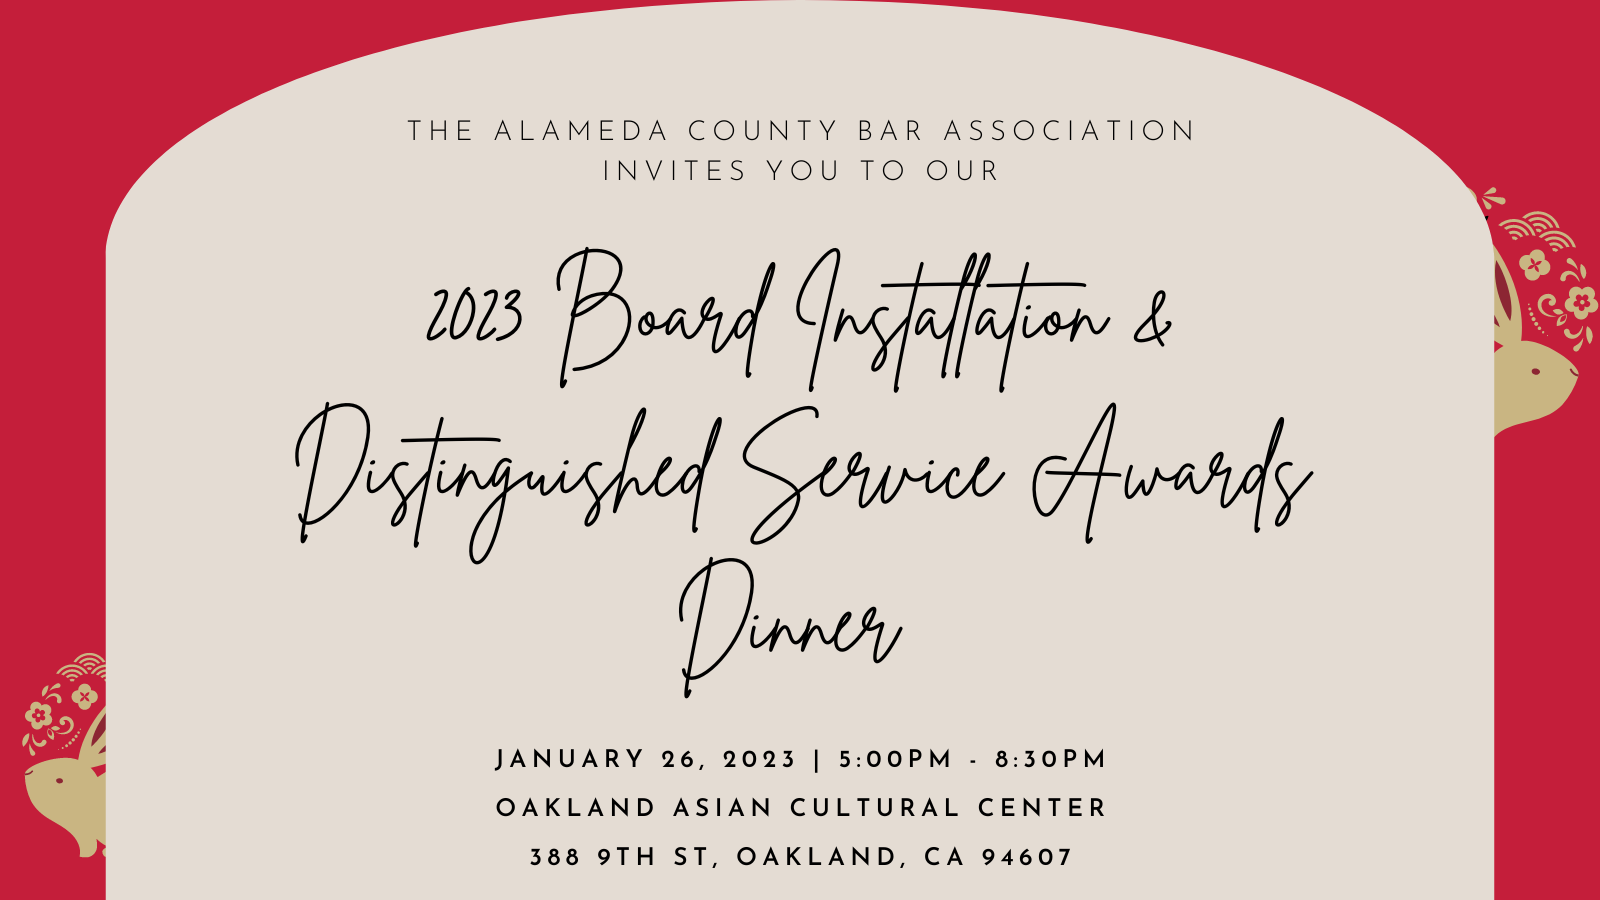 ACBA Board Installation and Distinguished Service Awards Dinner